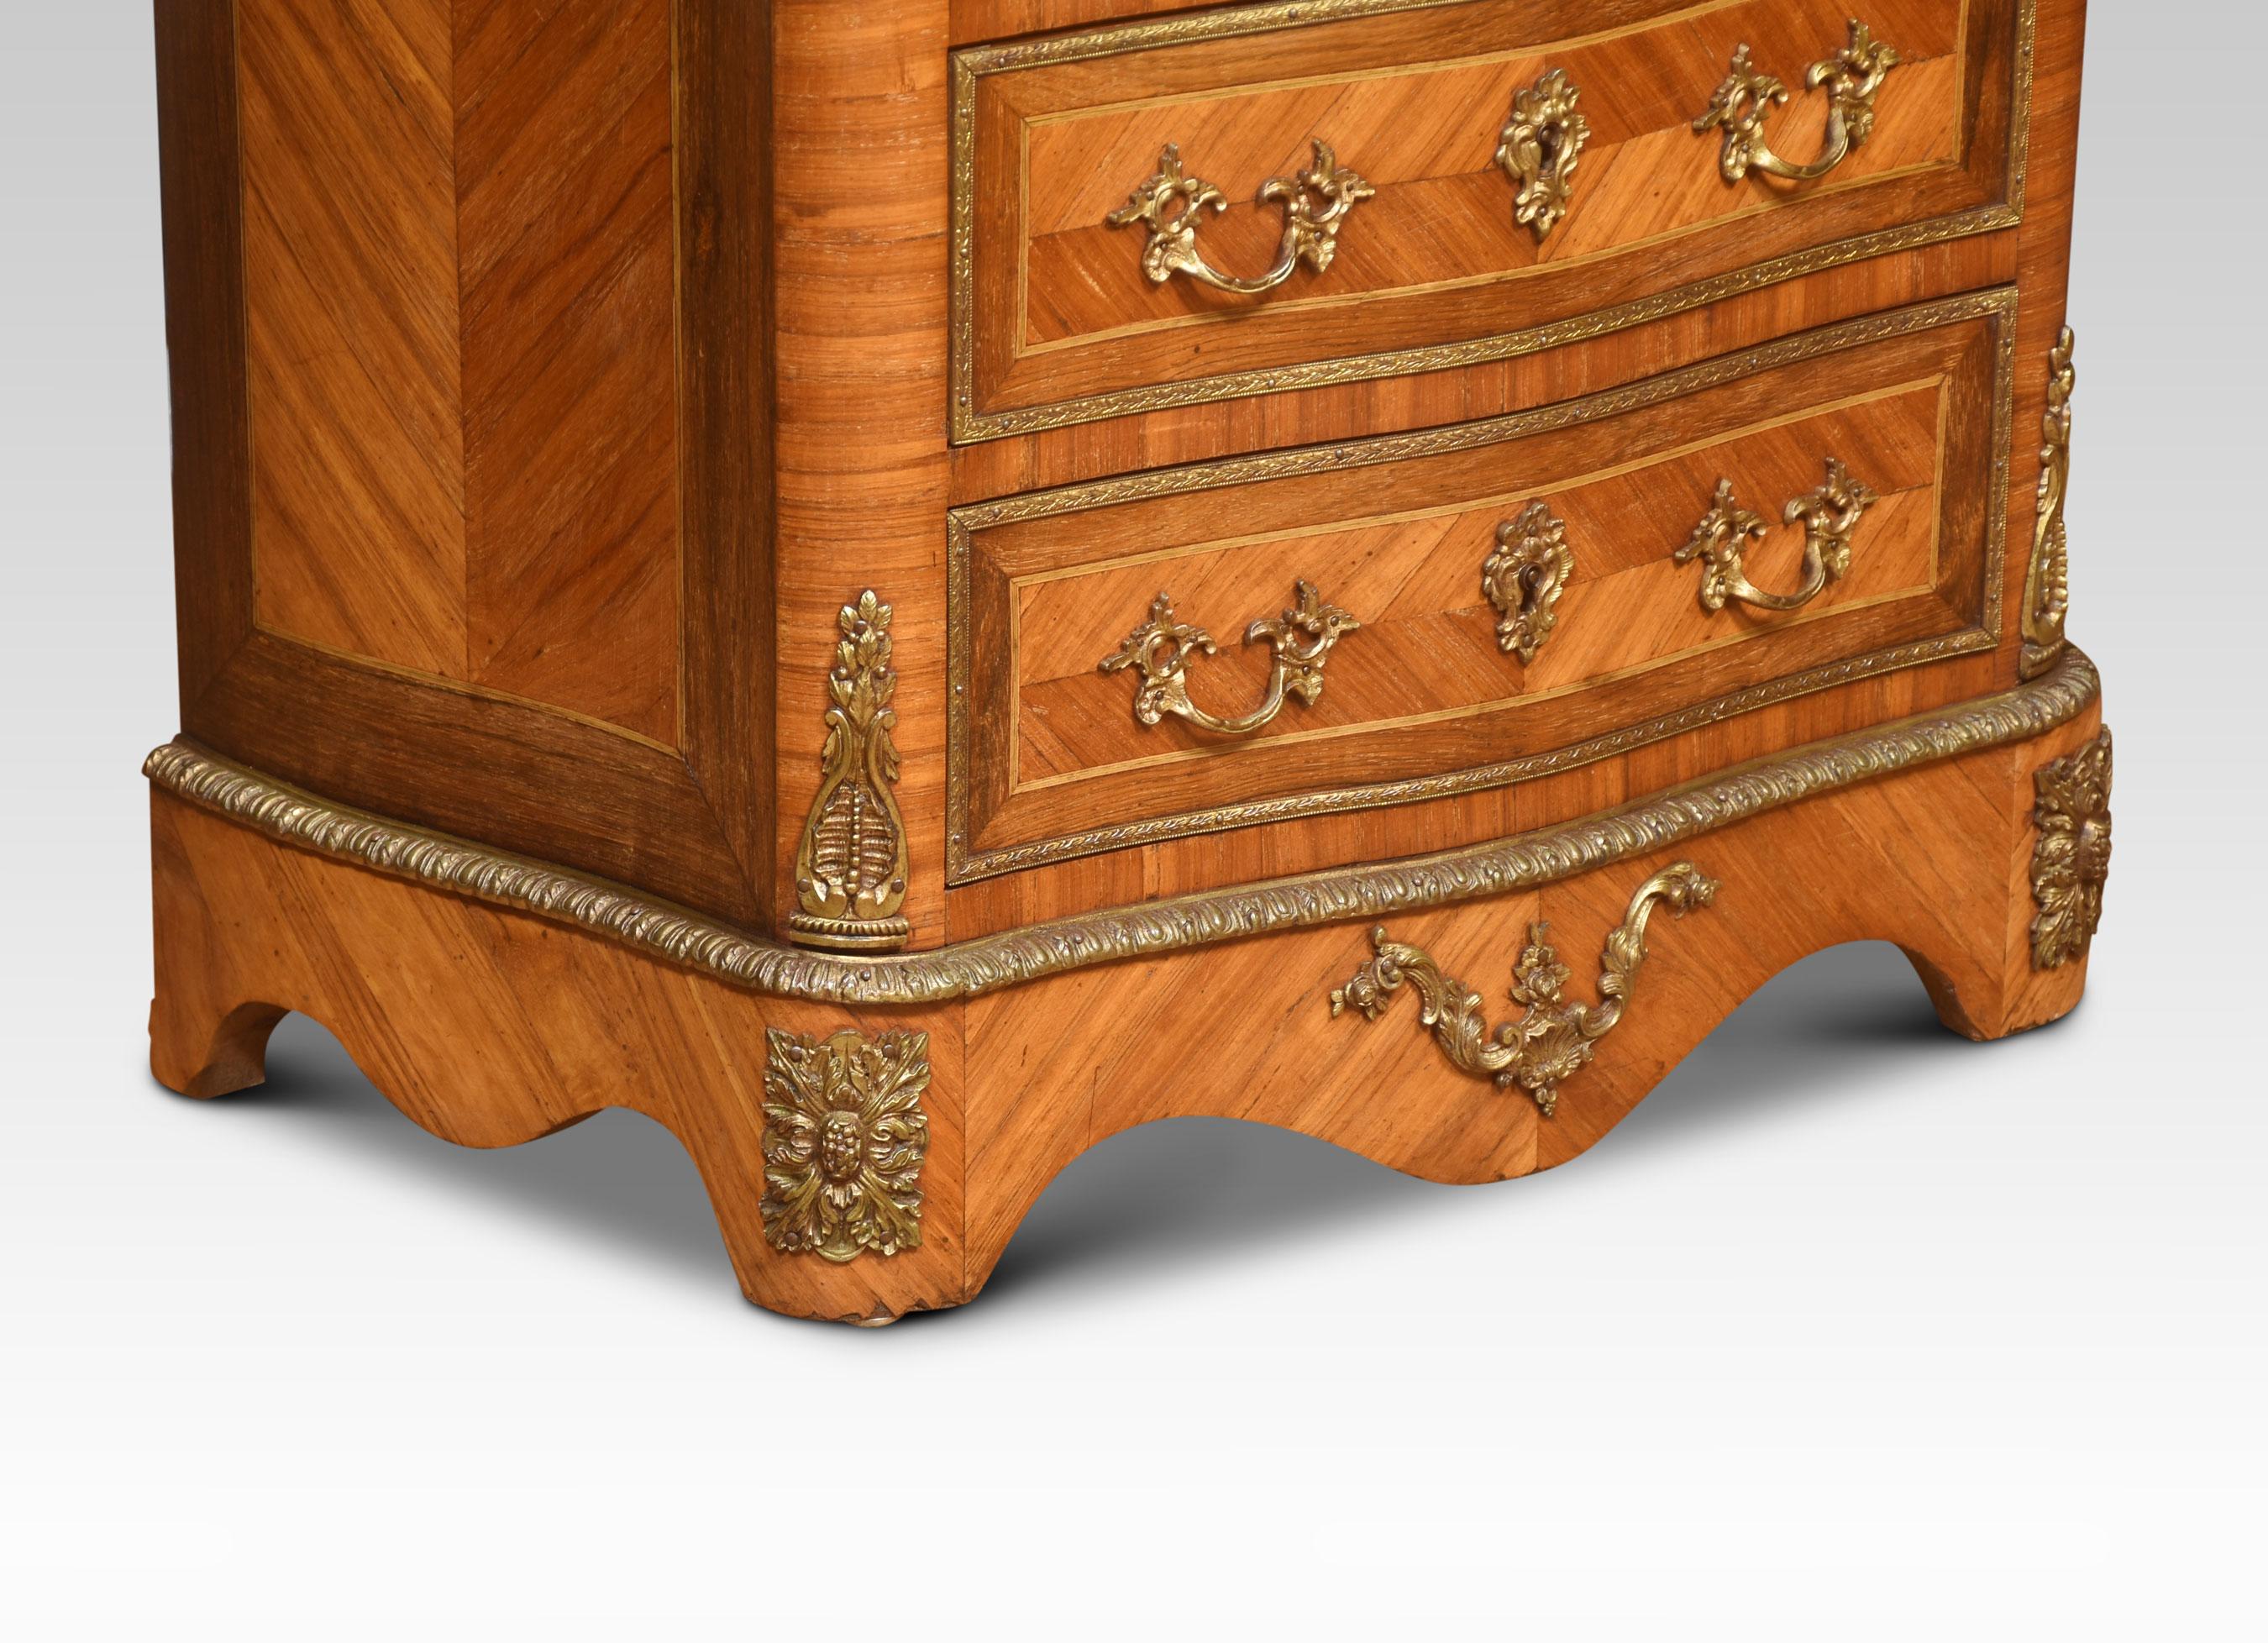 A French secretaire a’ abbattant, in the Louis XVI taste, the well-figured top, above conforming serpentine front over a fall front secretaire, enclosing drawers and shelf with a green tooled leather writing surface, above four further drawers, all